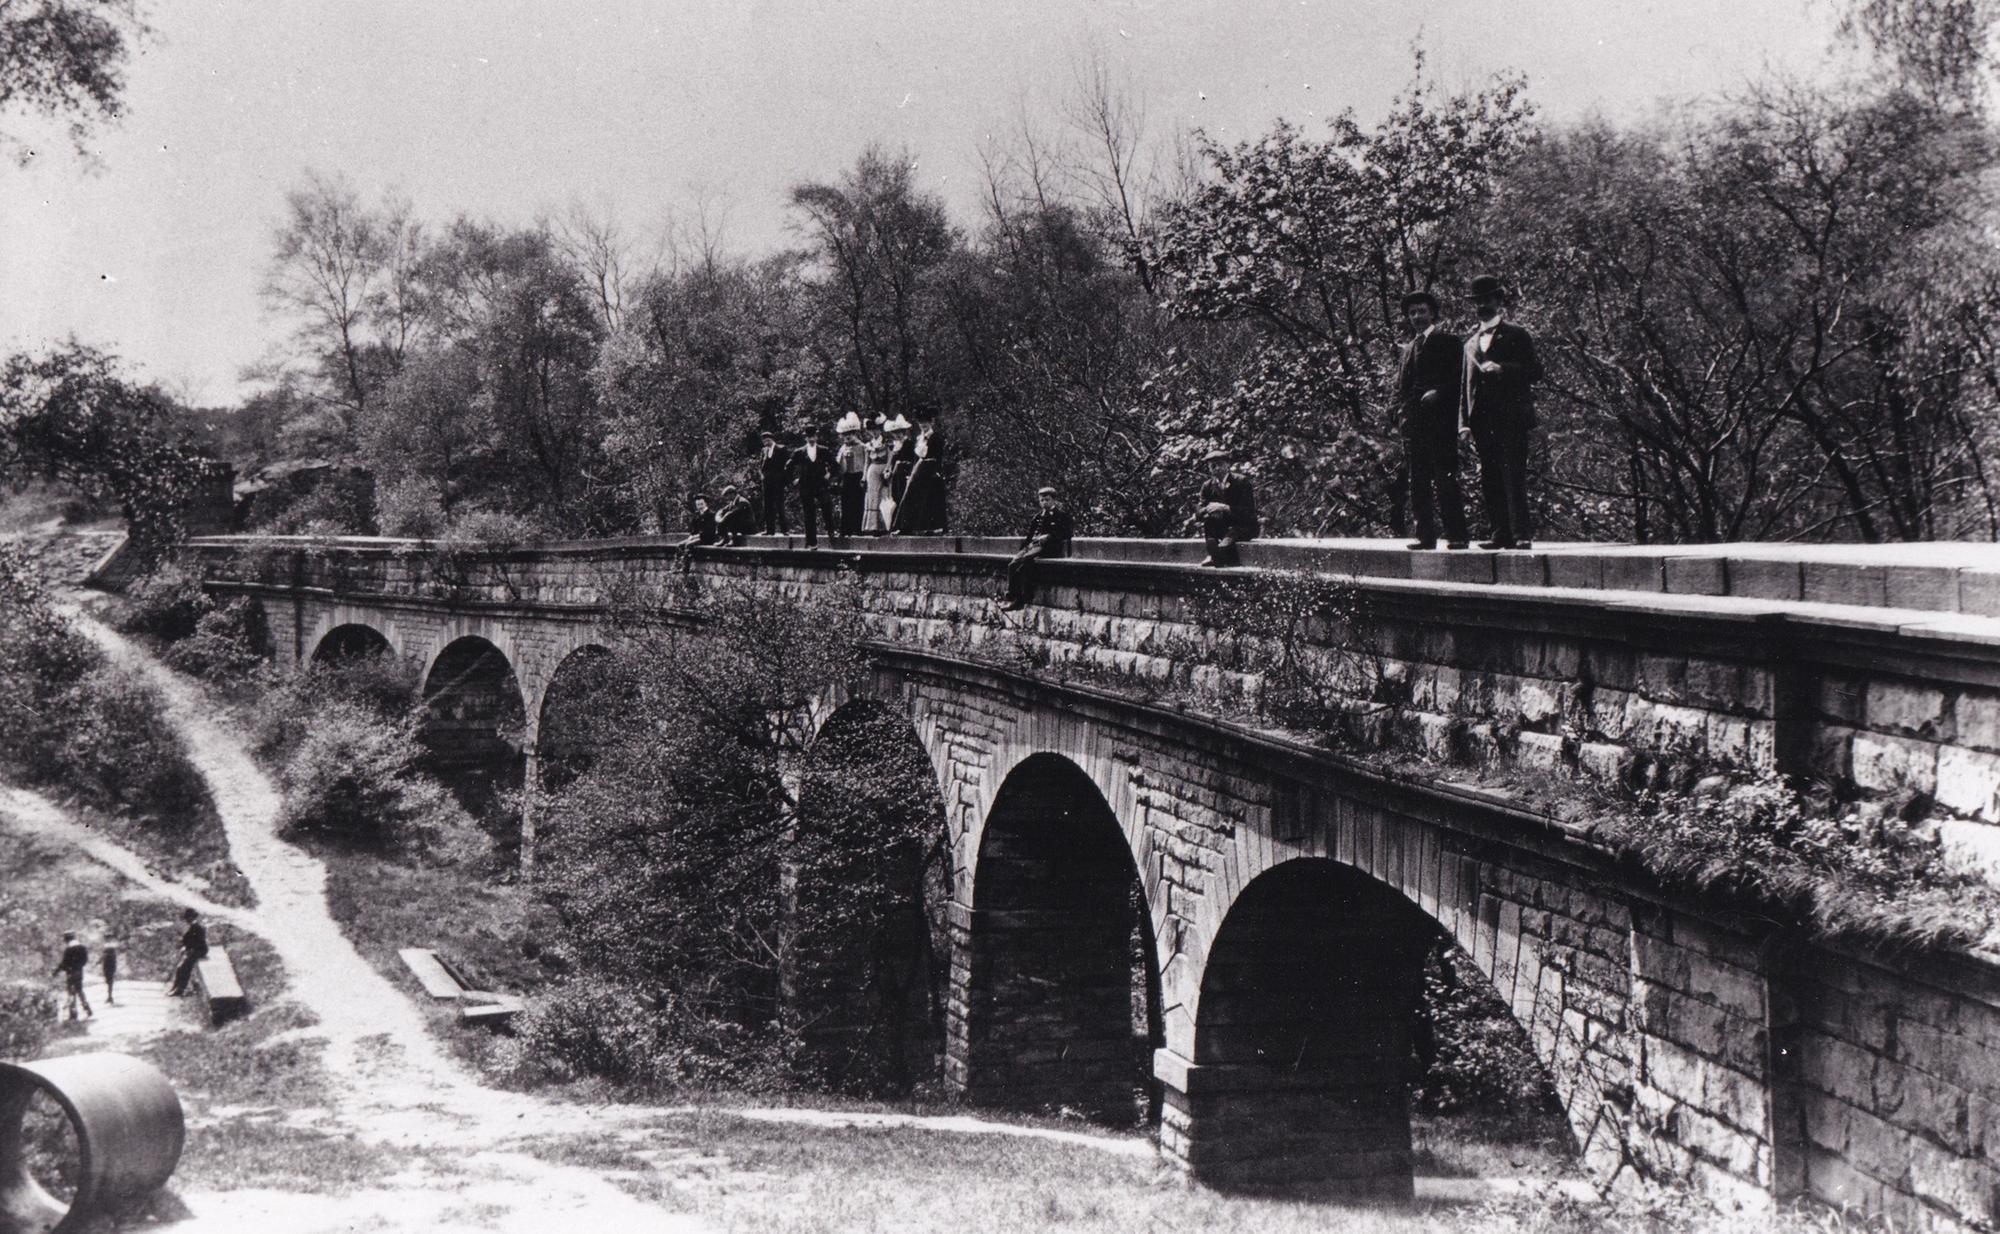 Seven Arches Aqueduct: The story of a man-made wonder of Leeds